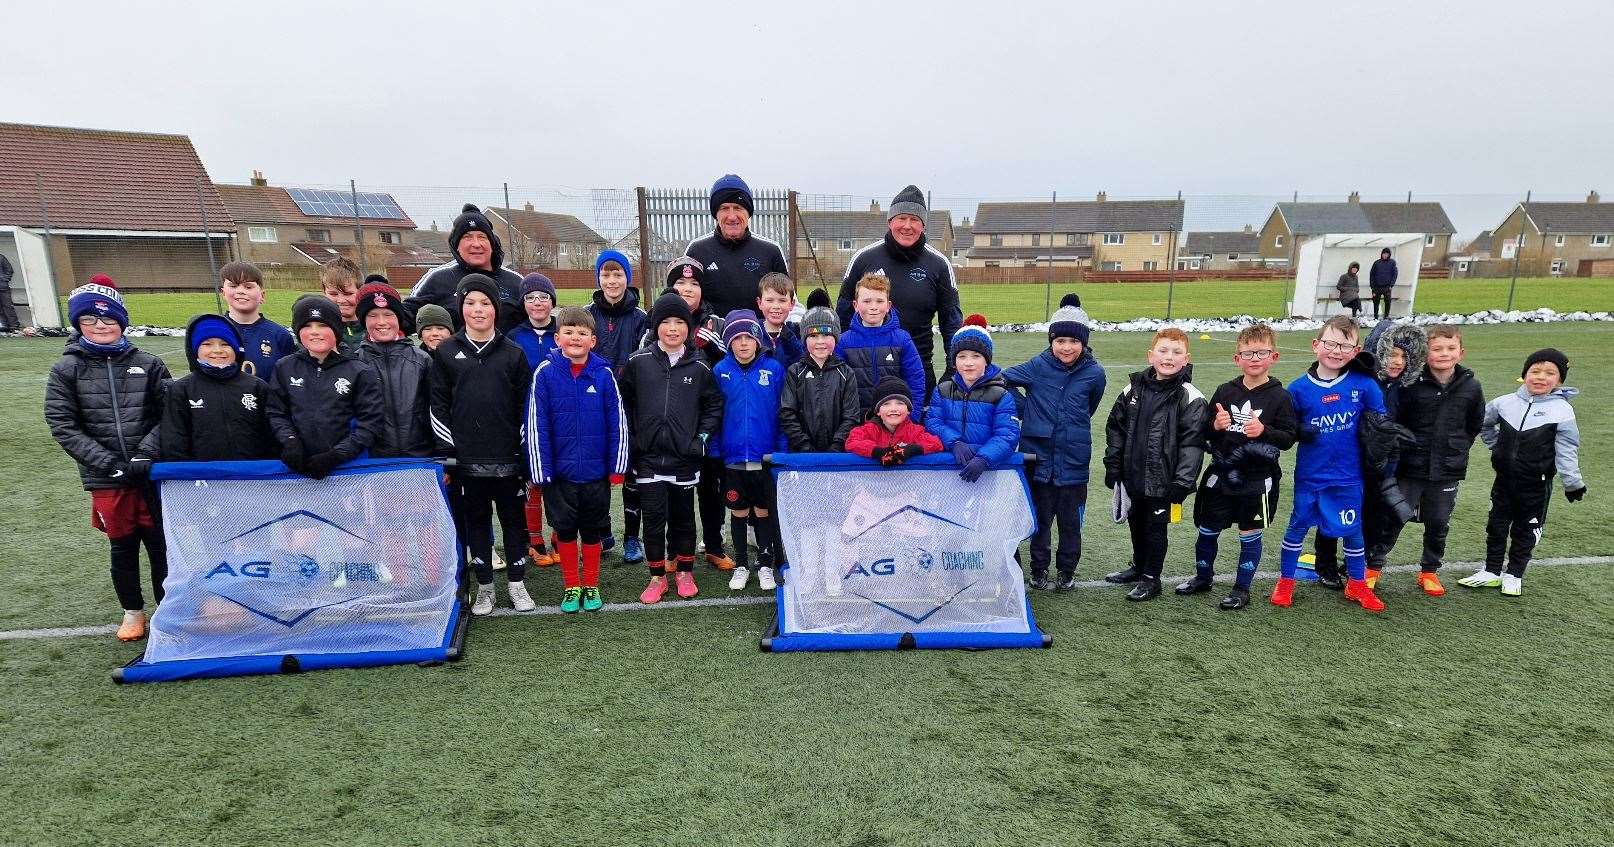 Children in the 5-10 group who took part in the AG Coaching event with Billy Dodds, Brian Irvine and Duncan Shearer.